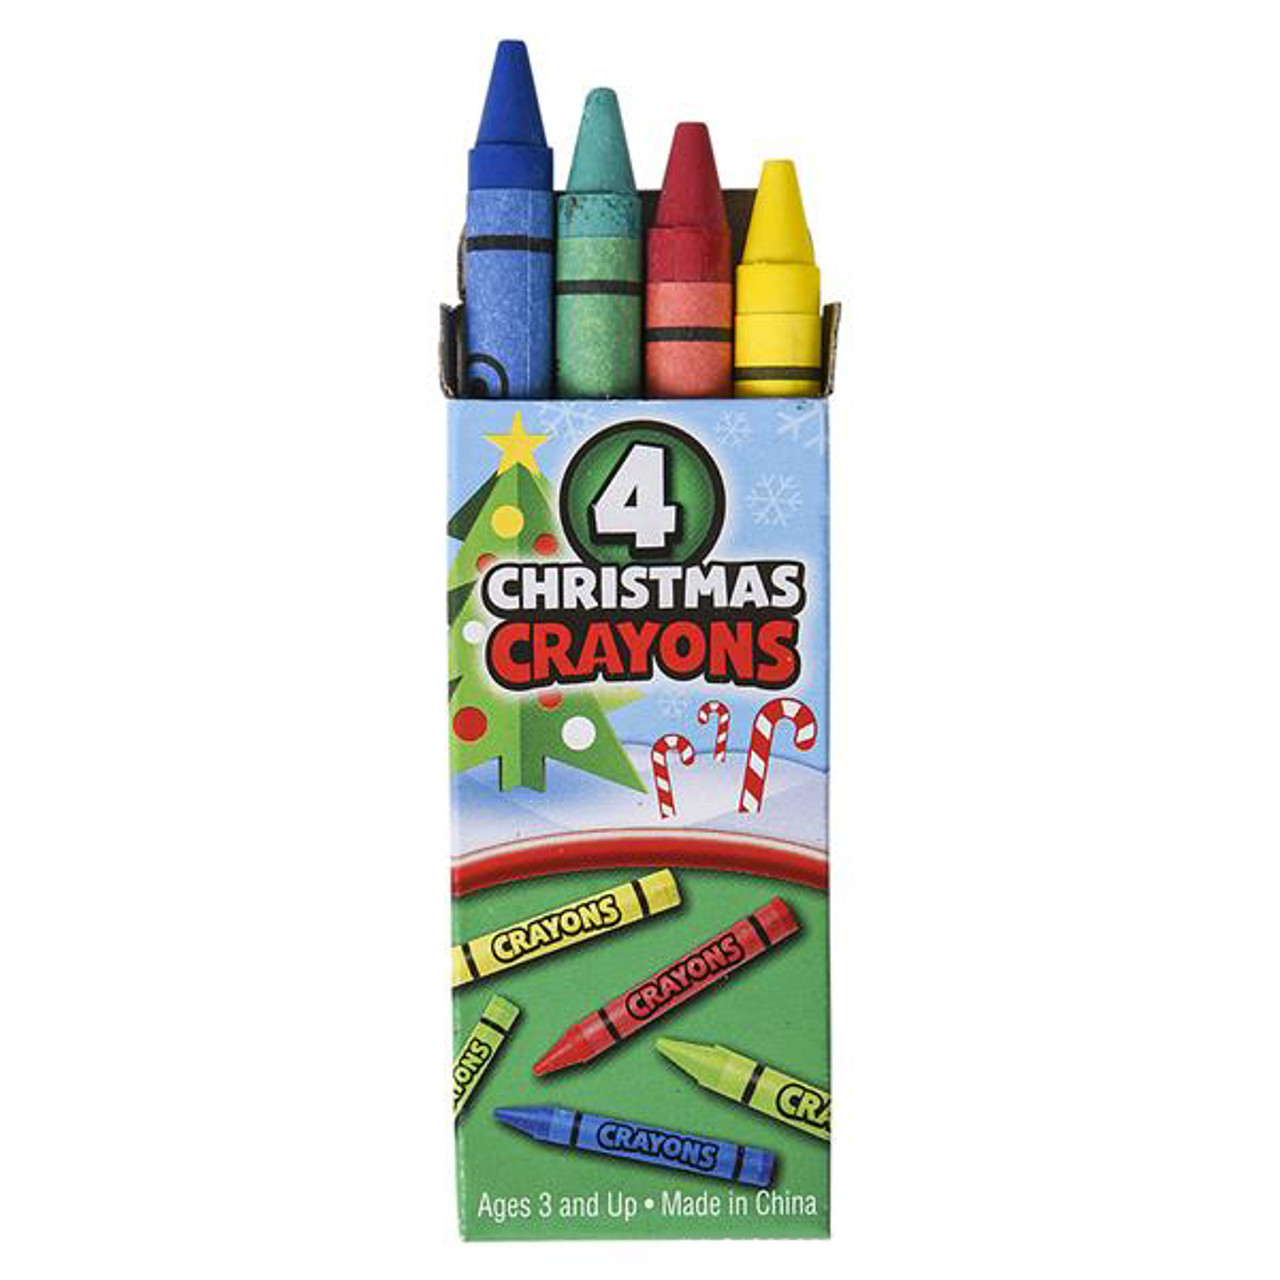 These are frickin' 'pencil crayons', eh?